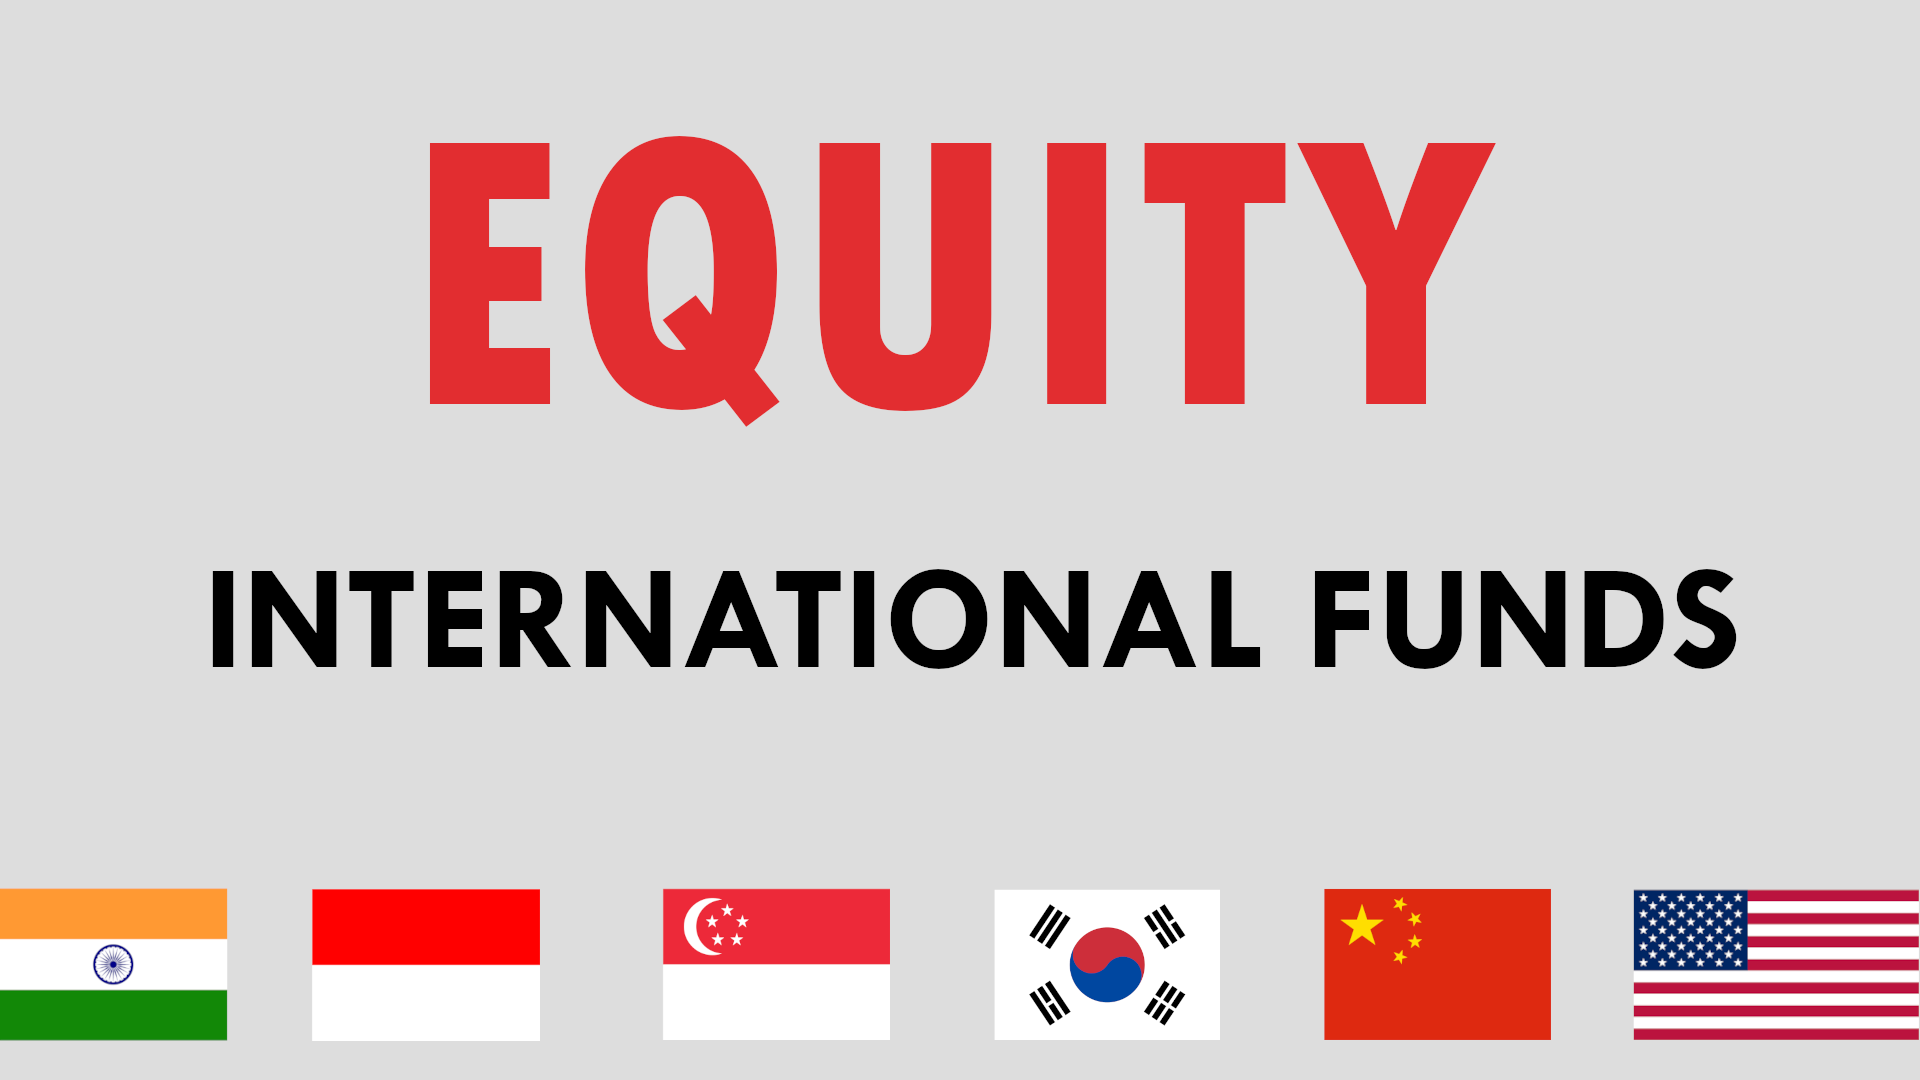 Equity - International Funds